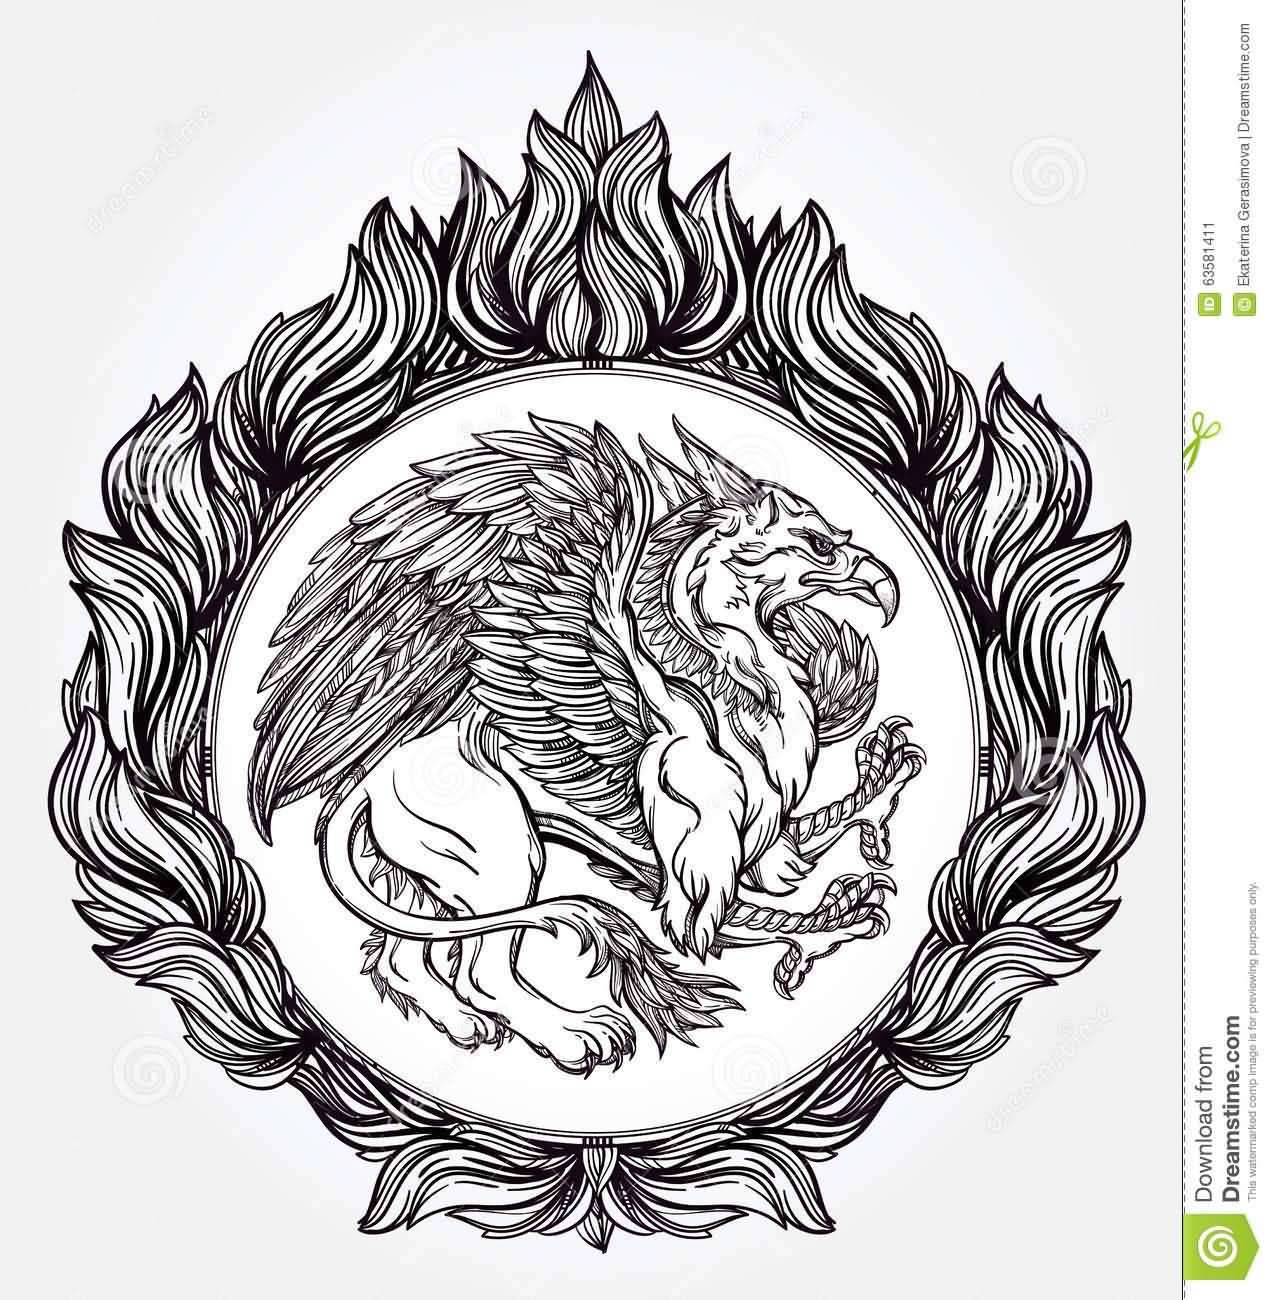 Magnificent Griffin In Nice Circle Frame Tattoo Design